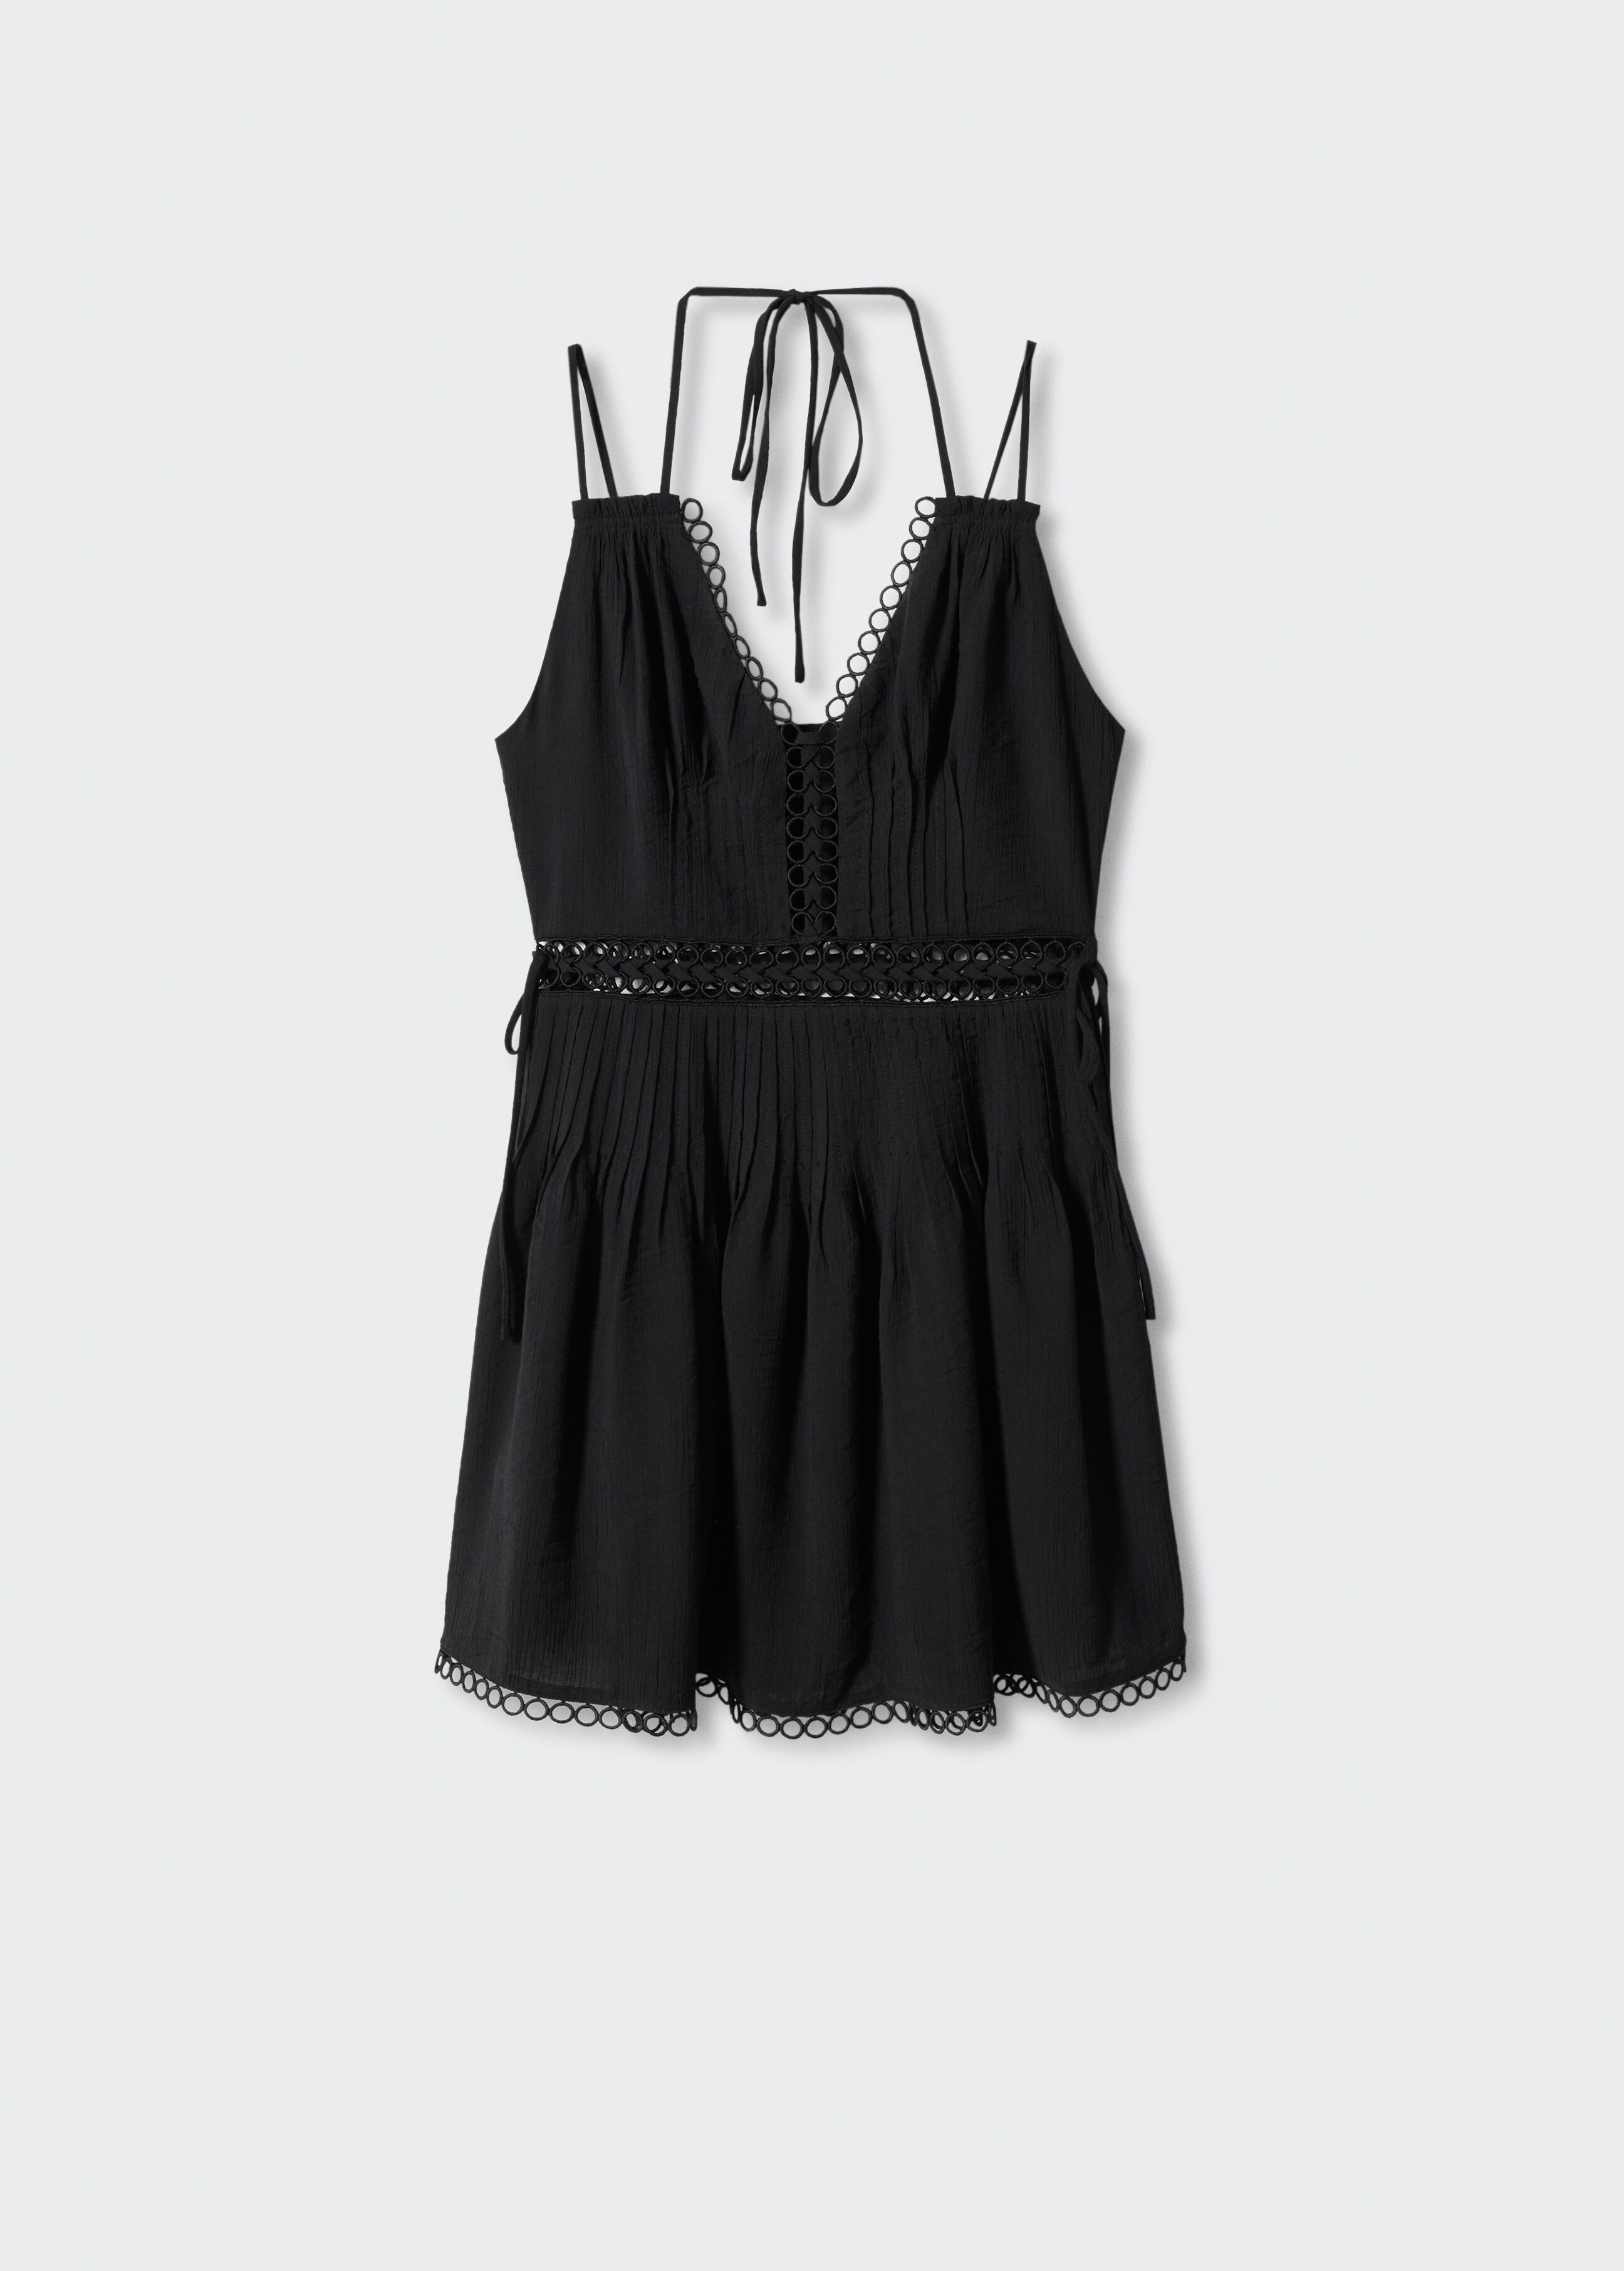 Openwork dress with double straps - Article without model